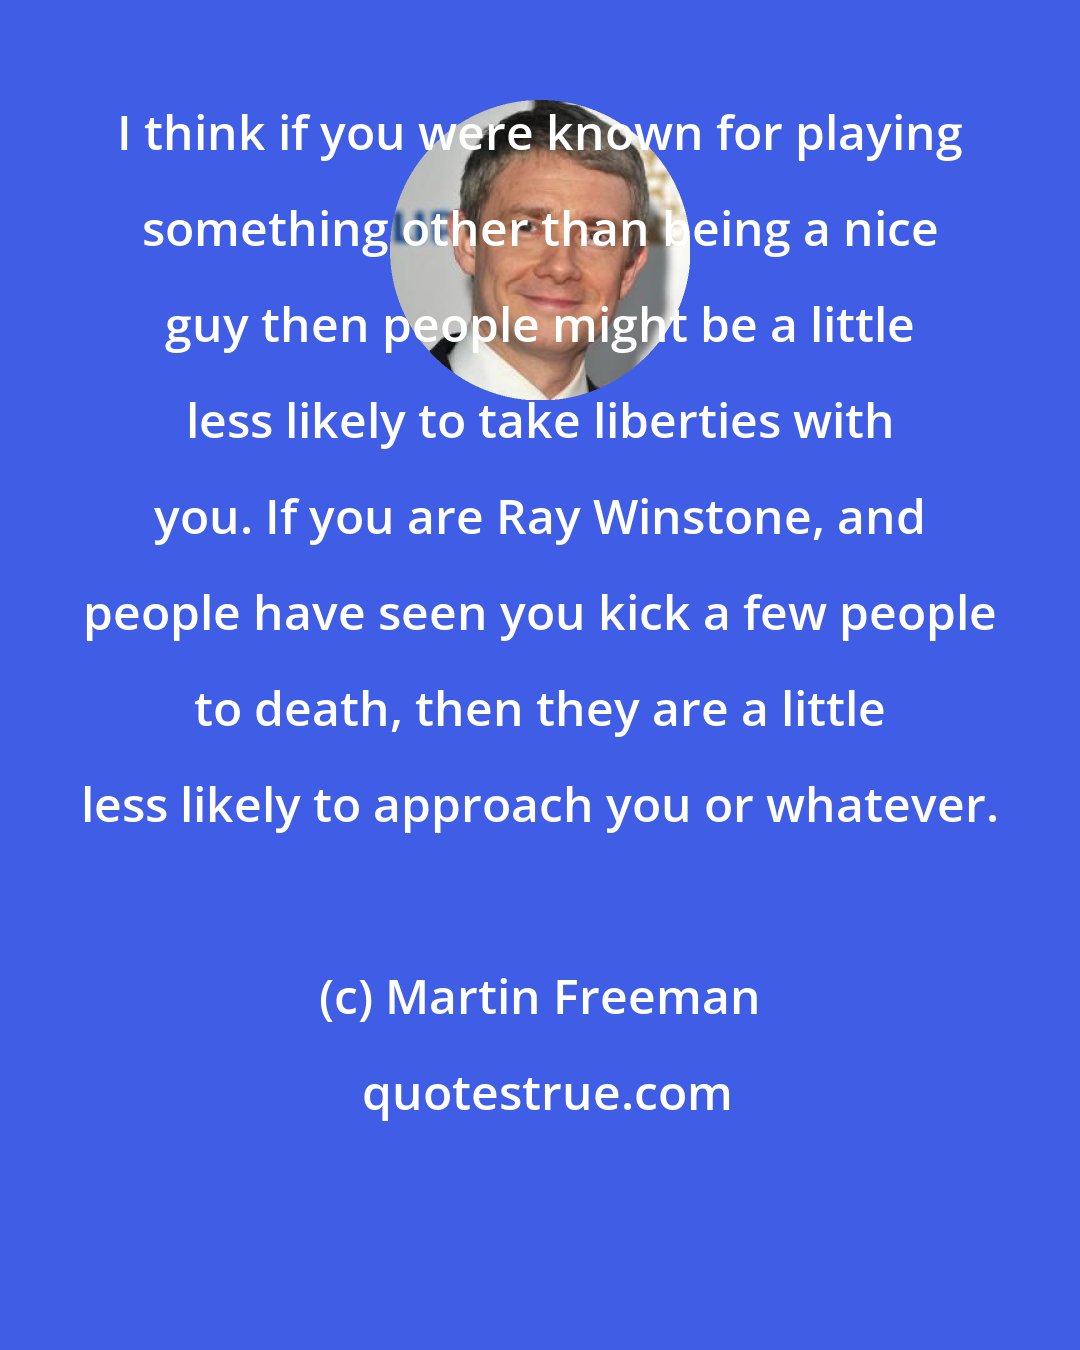 Martin Freeman: I think if you were known for playing something other than being a nice guy then people might be a little less likely to take liberties with you. If you are Ray Winstone, and people have seen you kick a few people to death, then they are a little less likely to approach you or whatever.